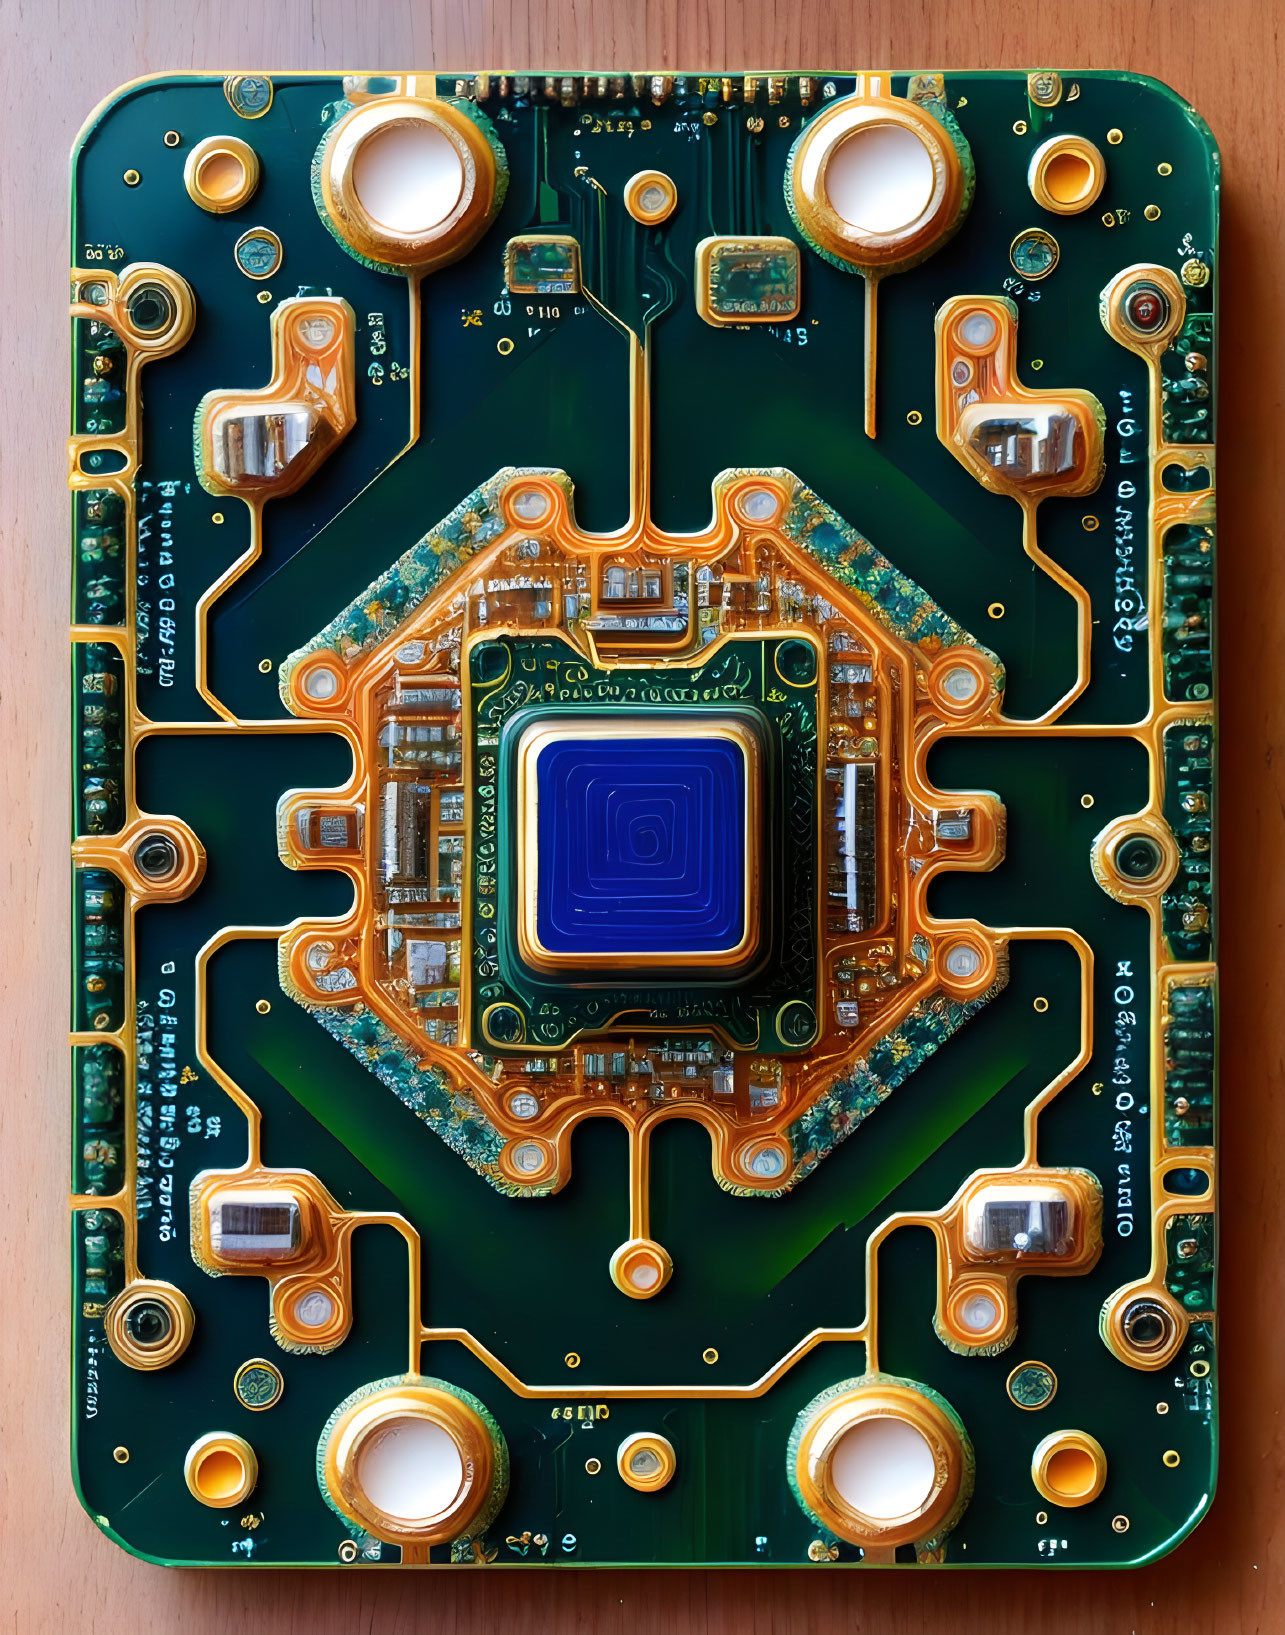 Detailed Close-Up of Green Printed Circuit Board Components